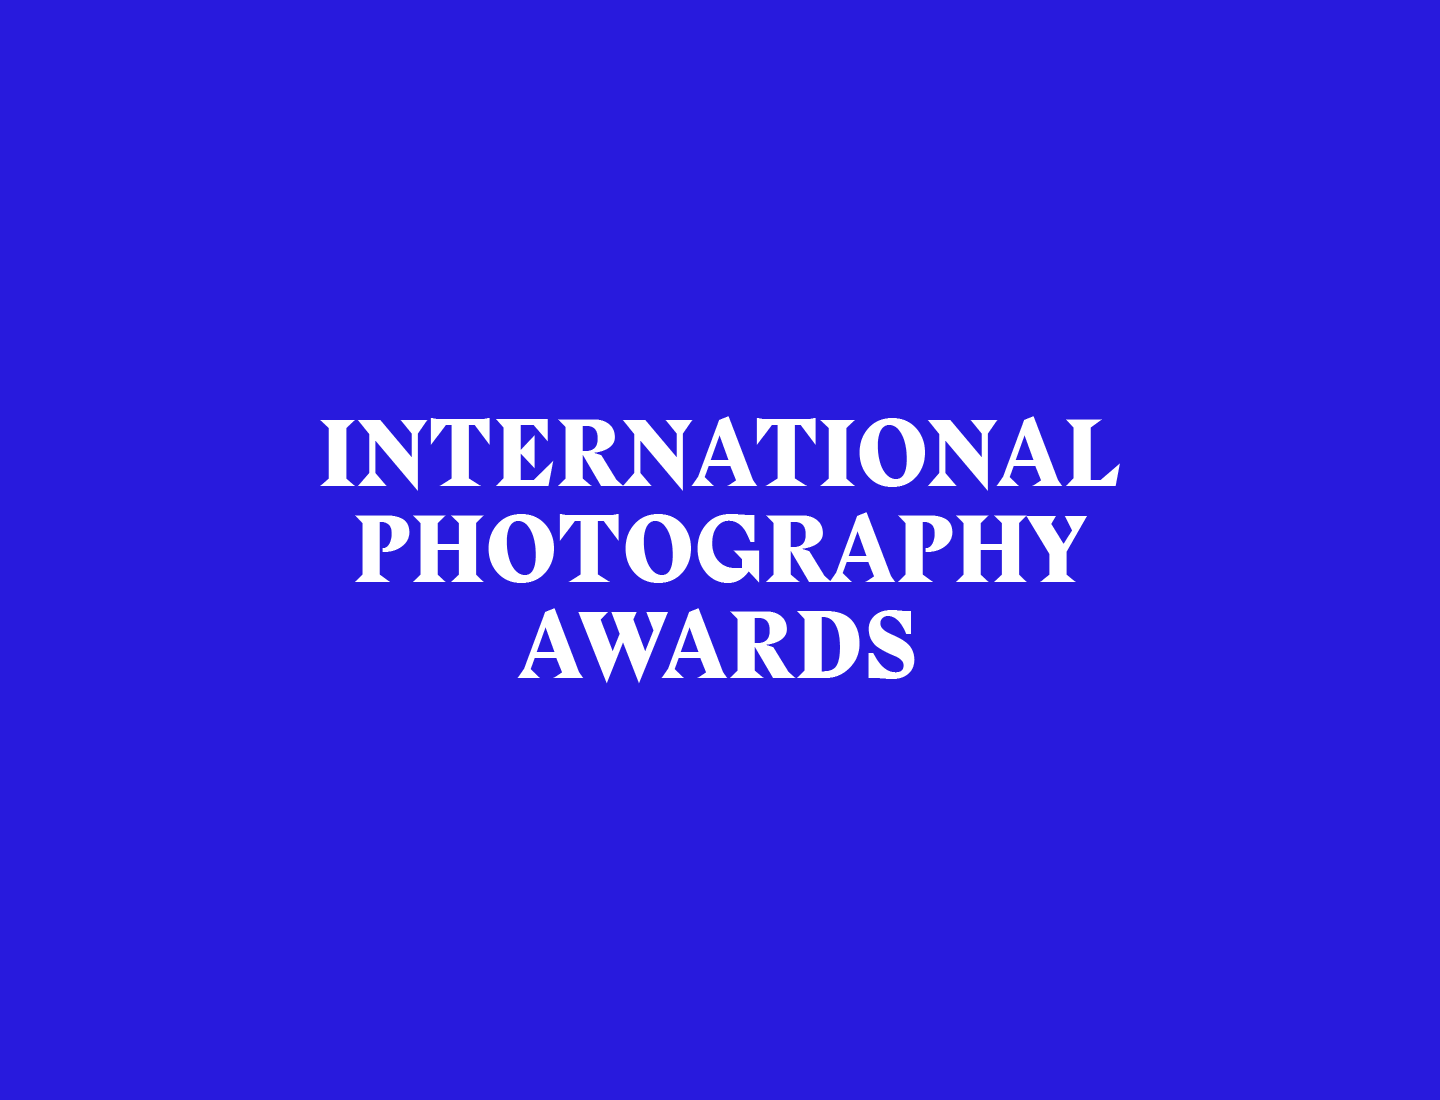 The Huge List of International Photography Awards and Competitions